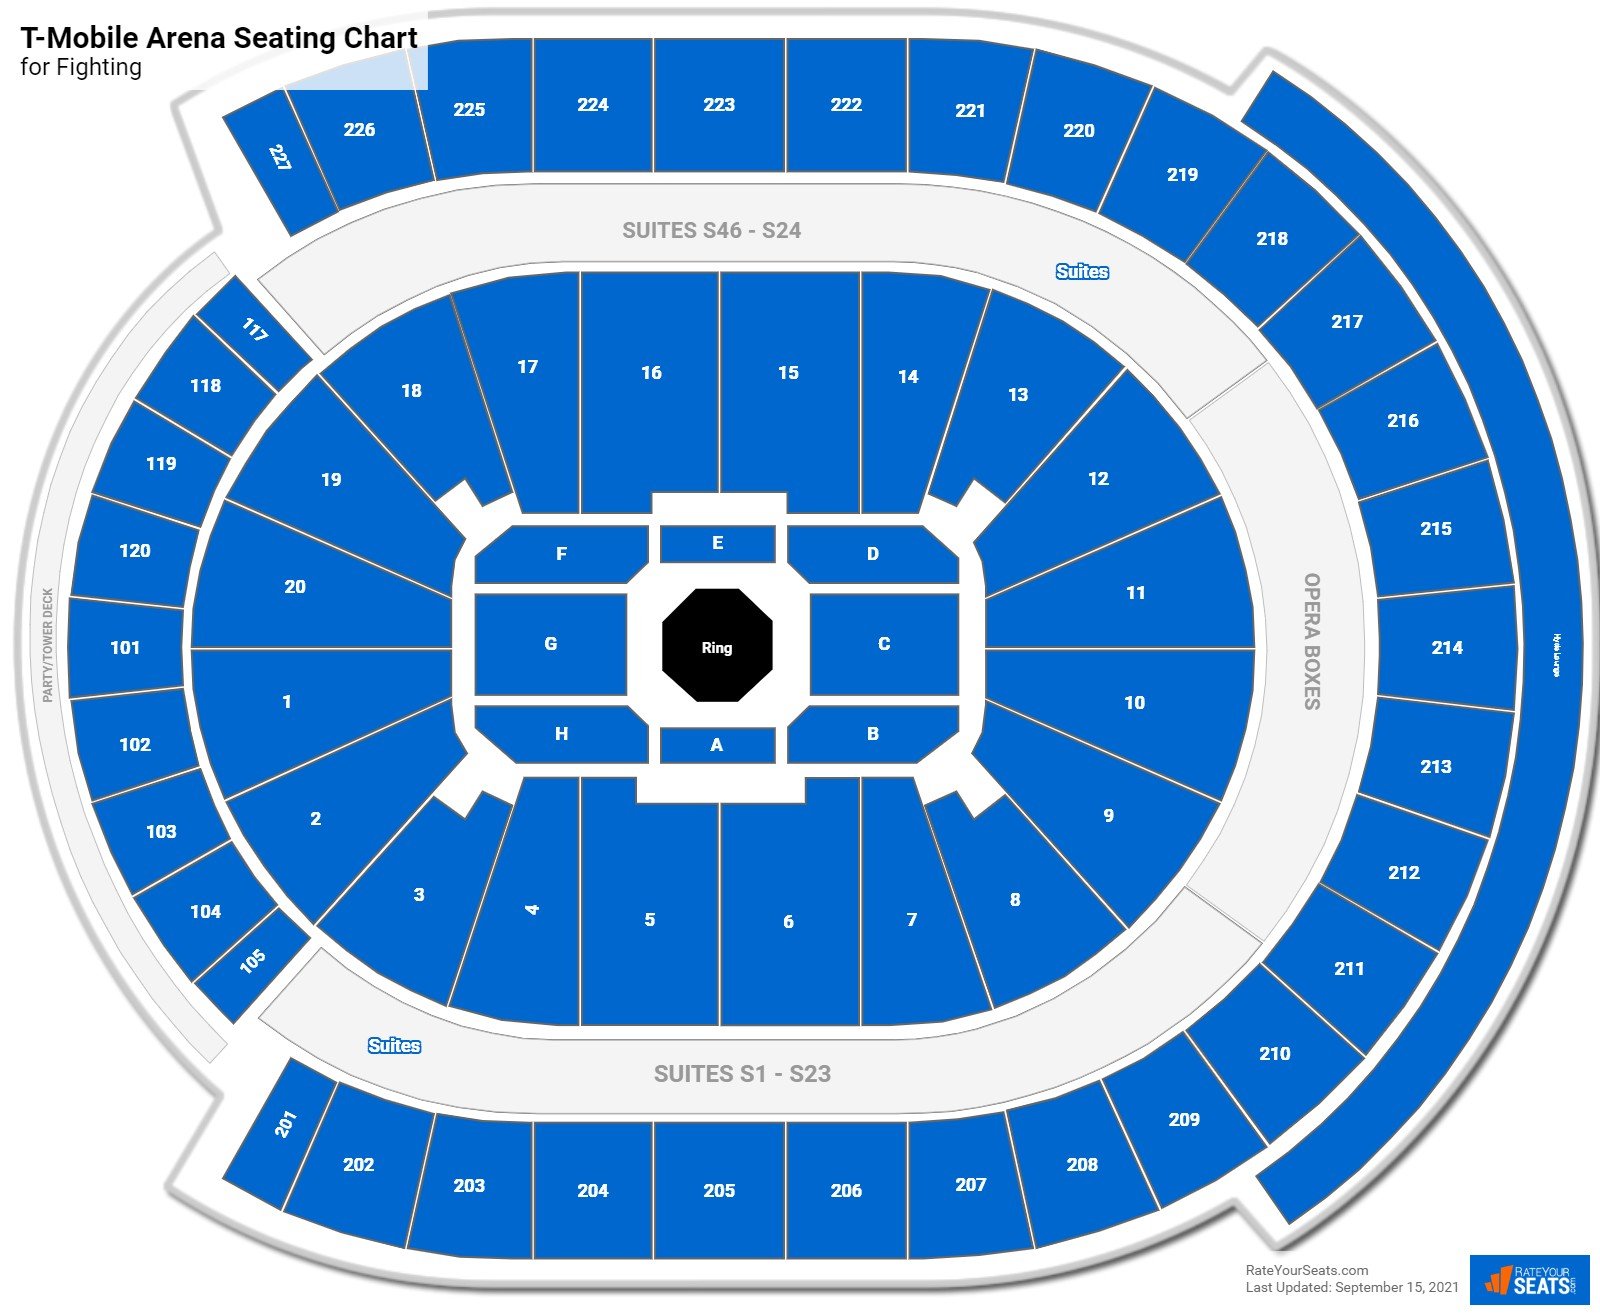 Seating Maps  T-Mobile Arena